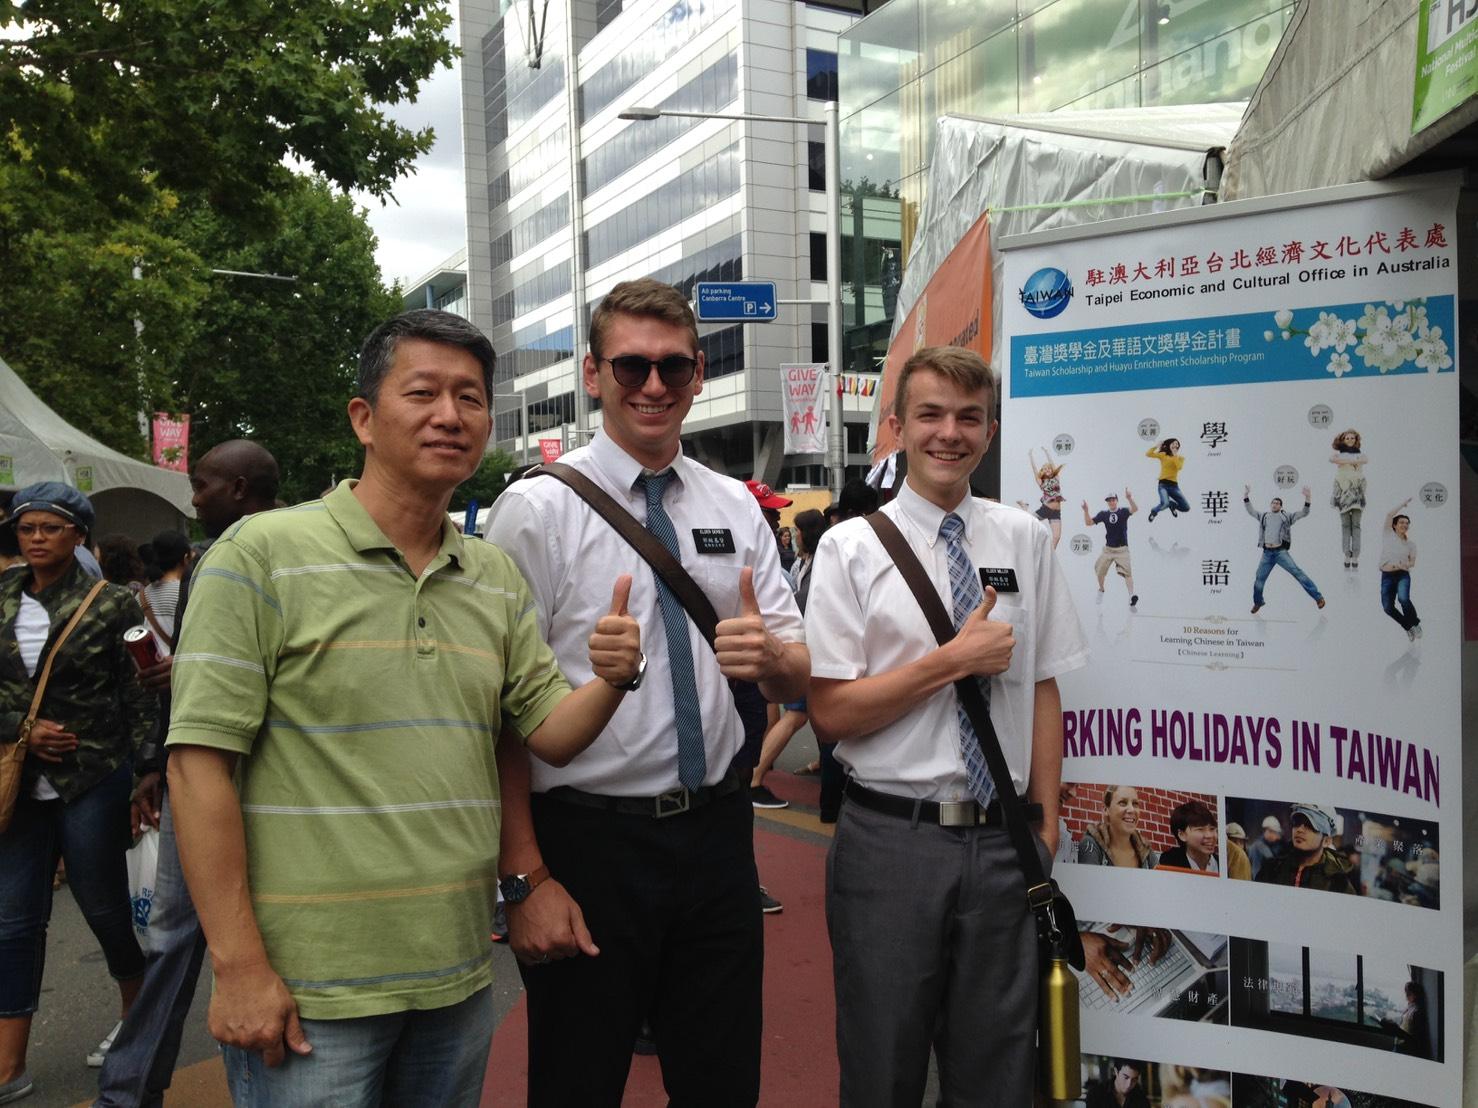 Australian students along with Executive Director Andy Bi at TECO were pictured in front of Studying Mandarin in Taiwan poster promoting scholarship programs offerd by Taiwan’s Ministry of Education at the Festival.